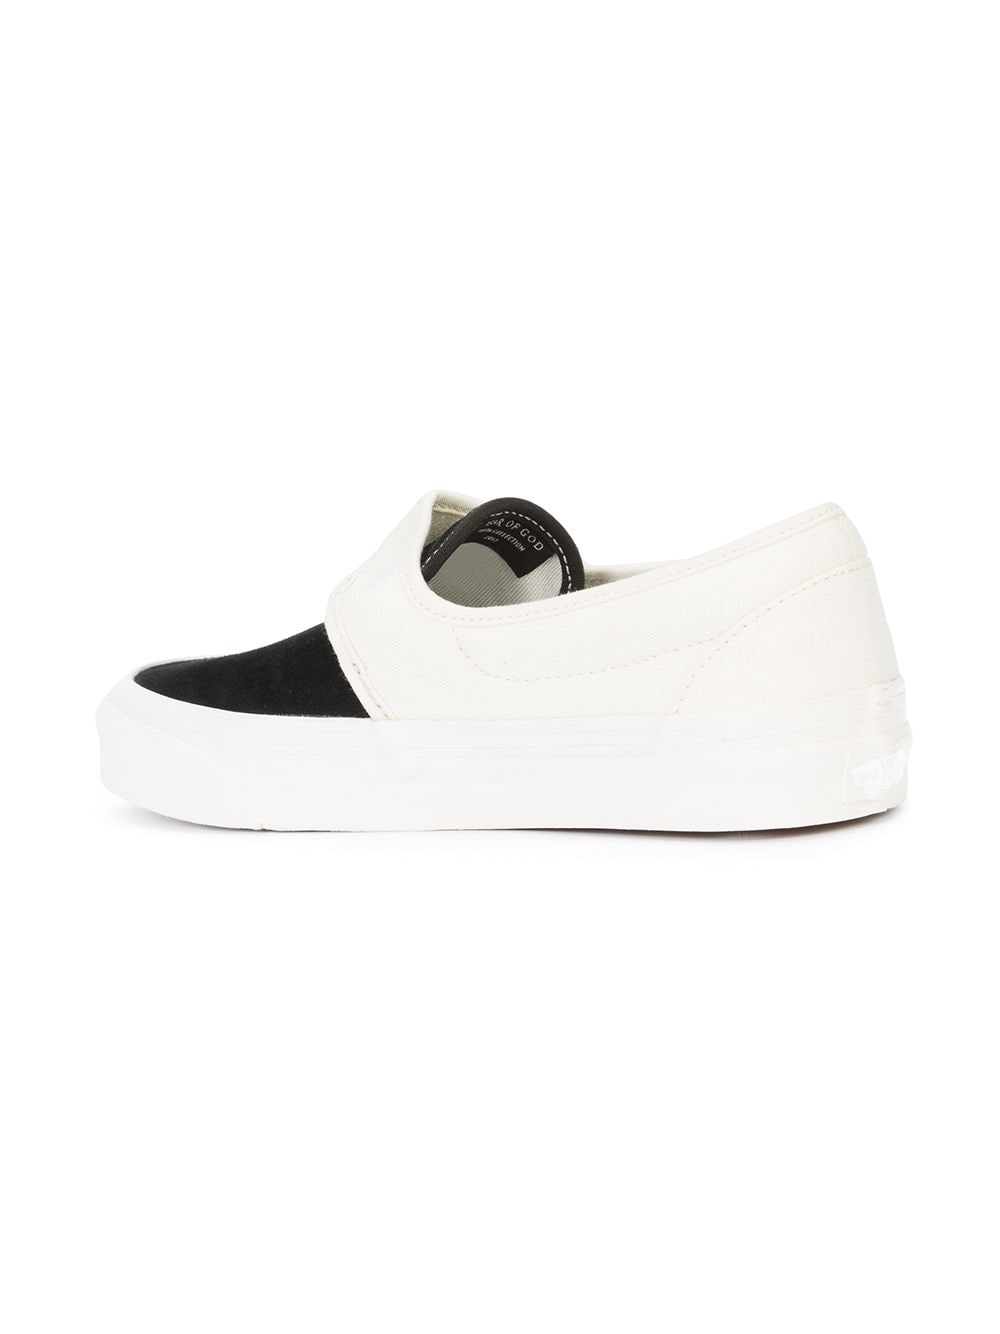 Vans x Fear Of God Slip-On 47 Collection 2 Black White Sneakers - Farfetch